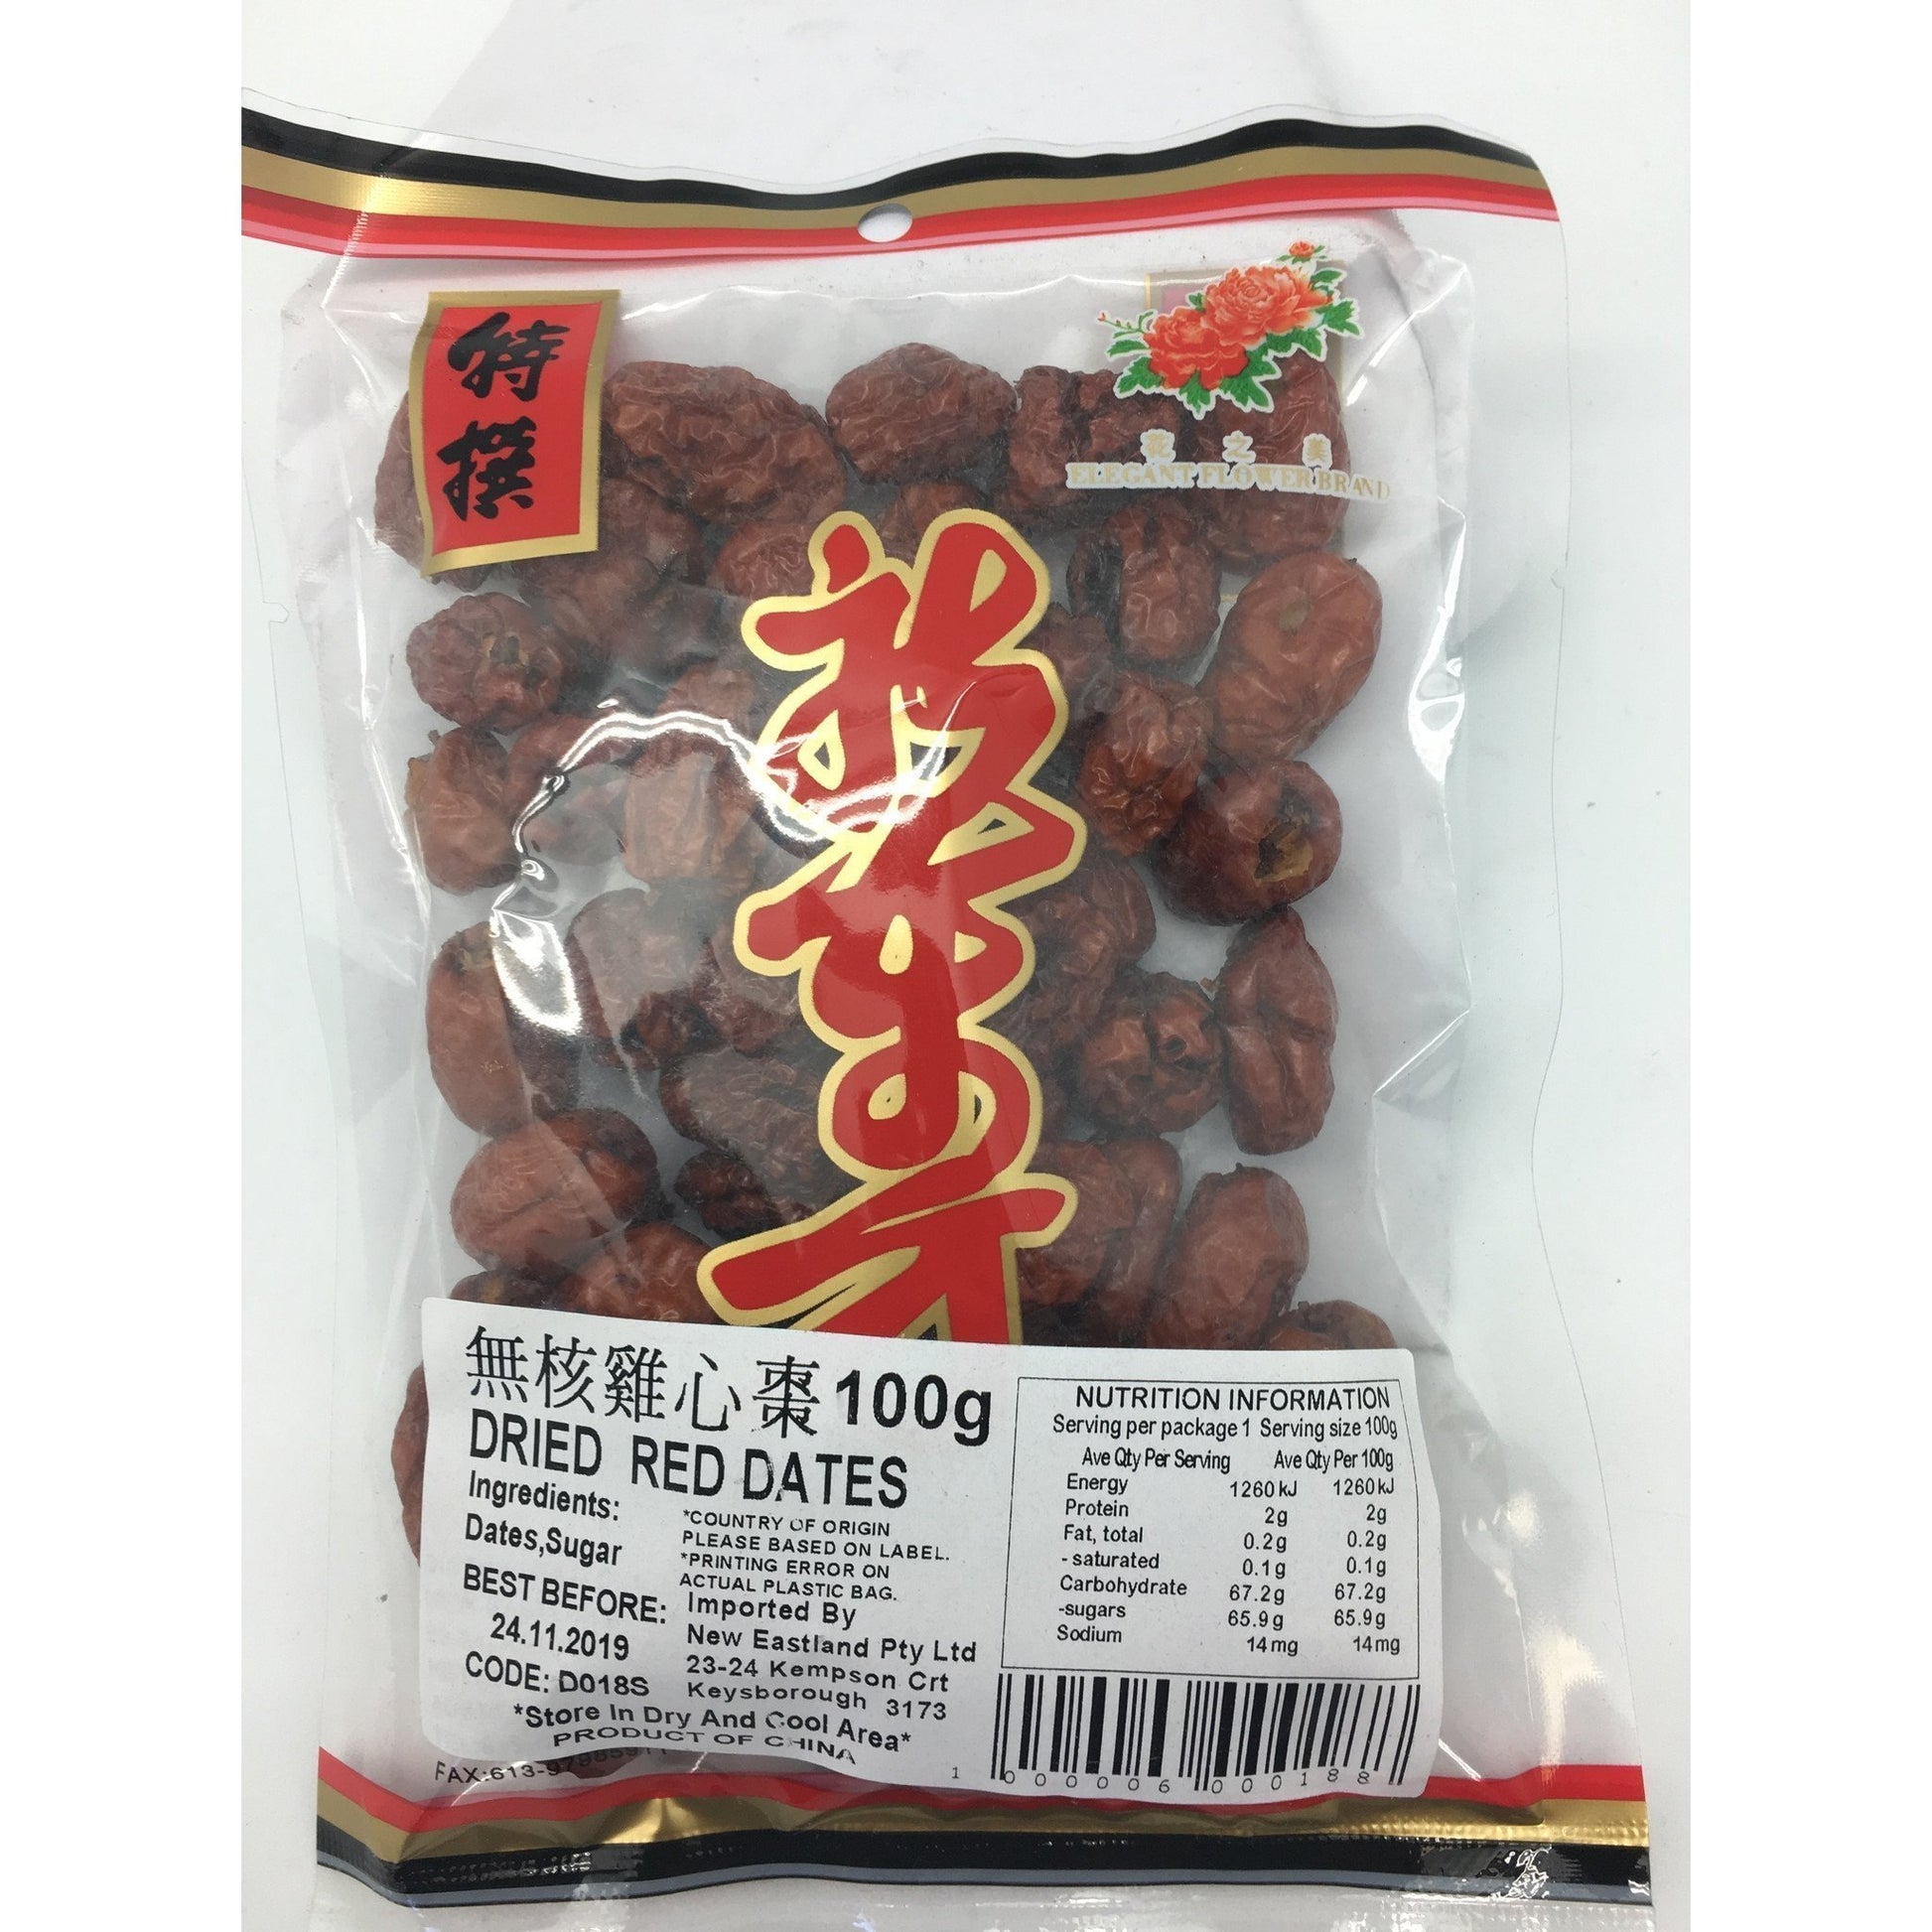 D018S New Eastland Brand - Dried Red Dates 100g - 50 bags / 1CTN - New Eastland Pty Ltd - Asian food wholesalers